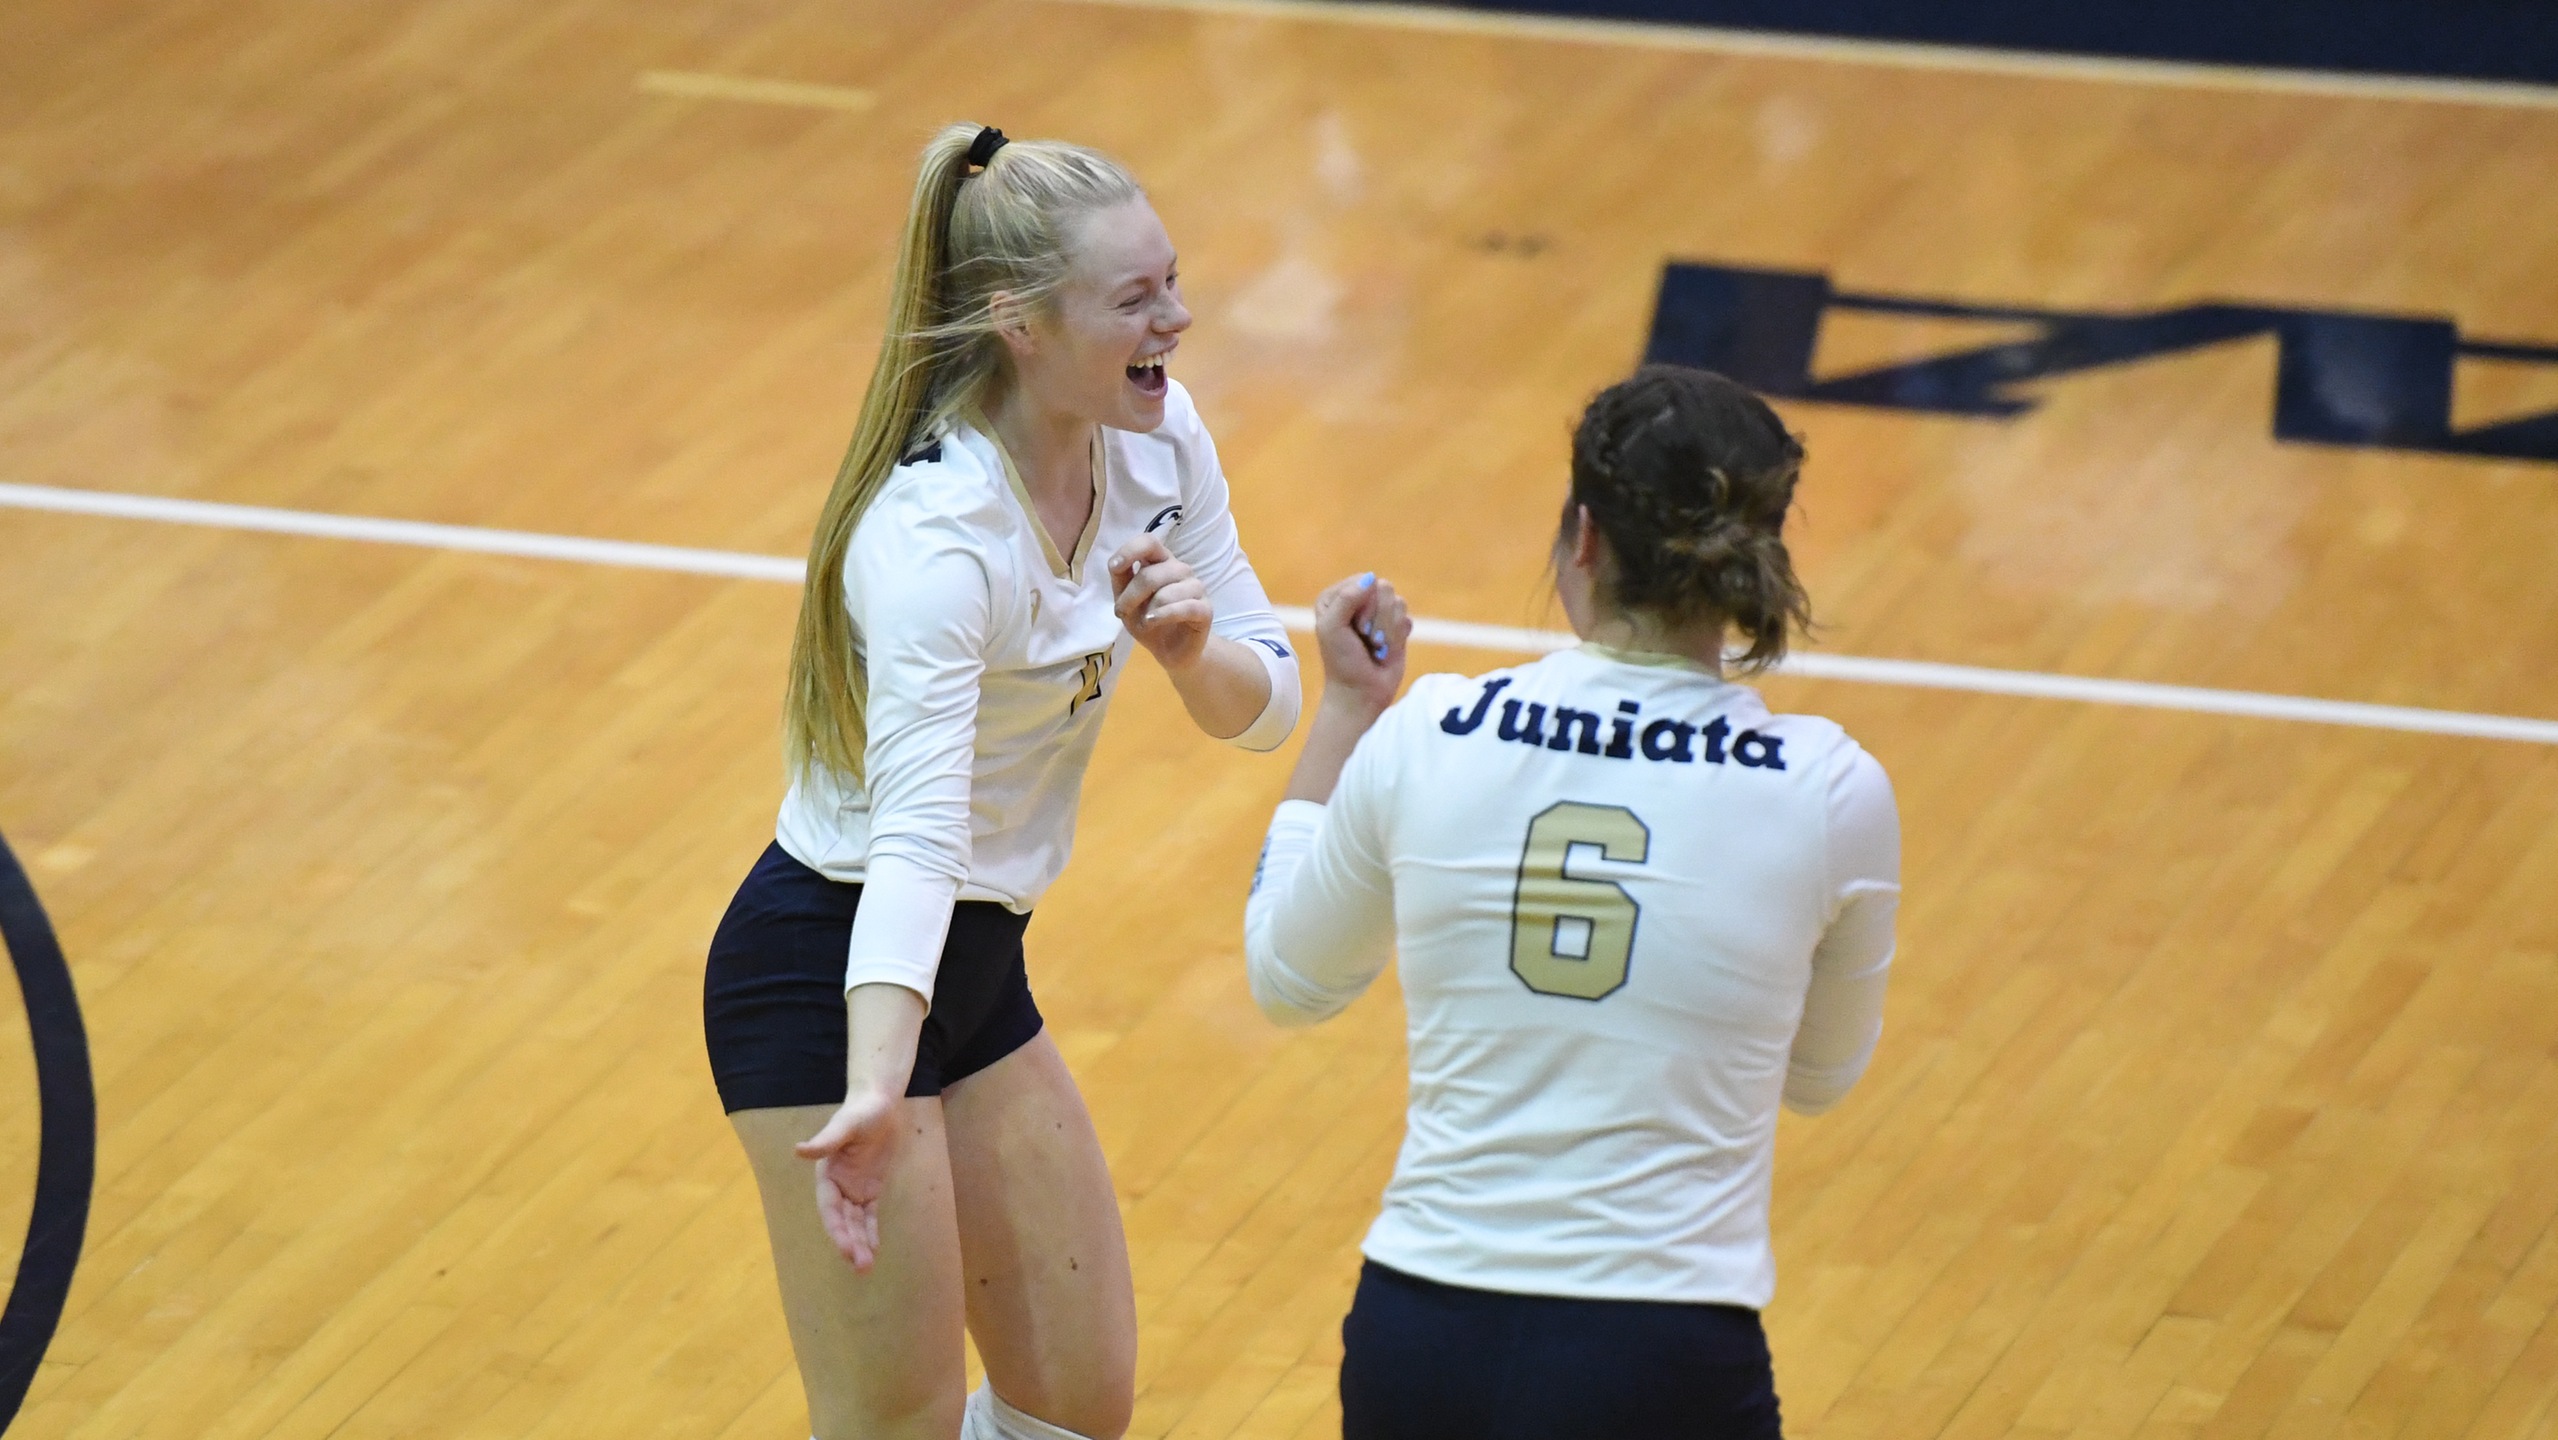 Women's Volleyball Wins First Match of the Year